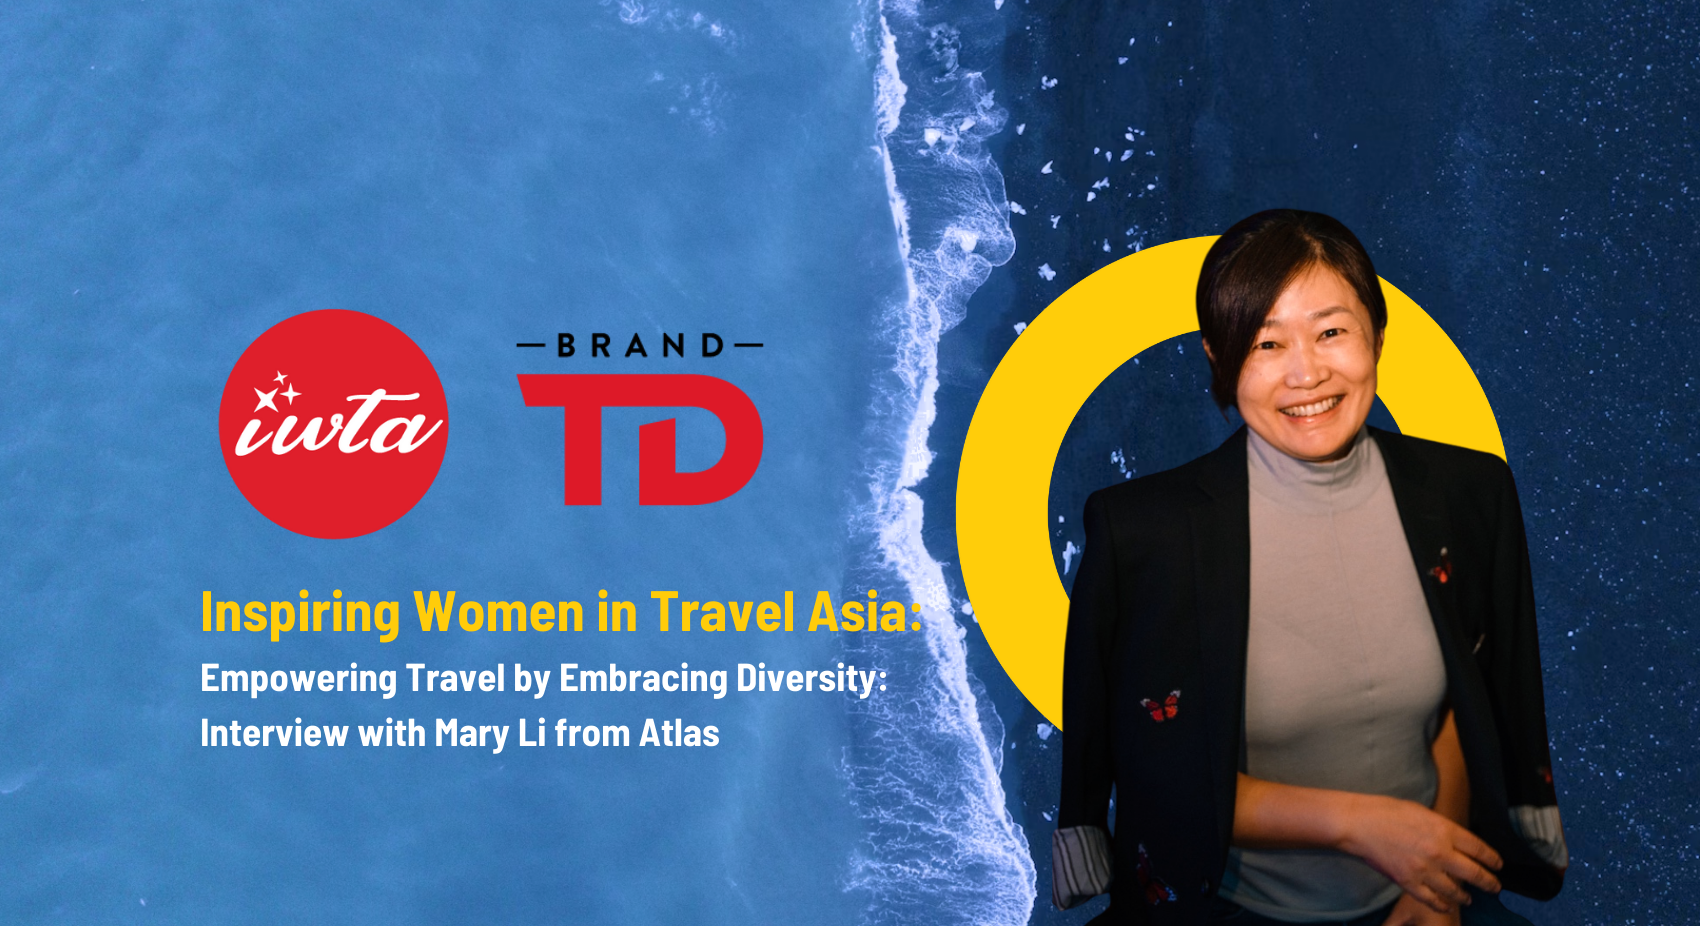 Empowering Travel by Embracing Diversity: Interview with Mary Li from Atlas